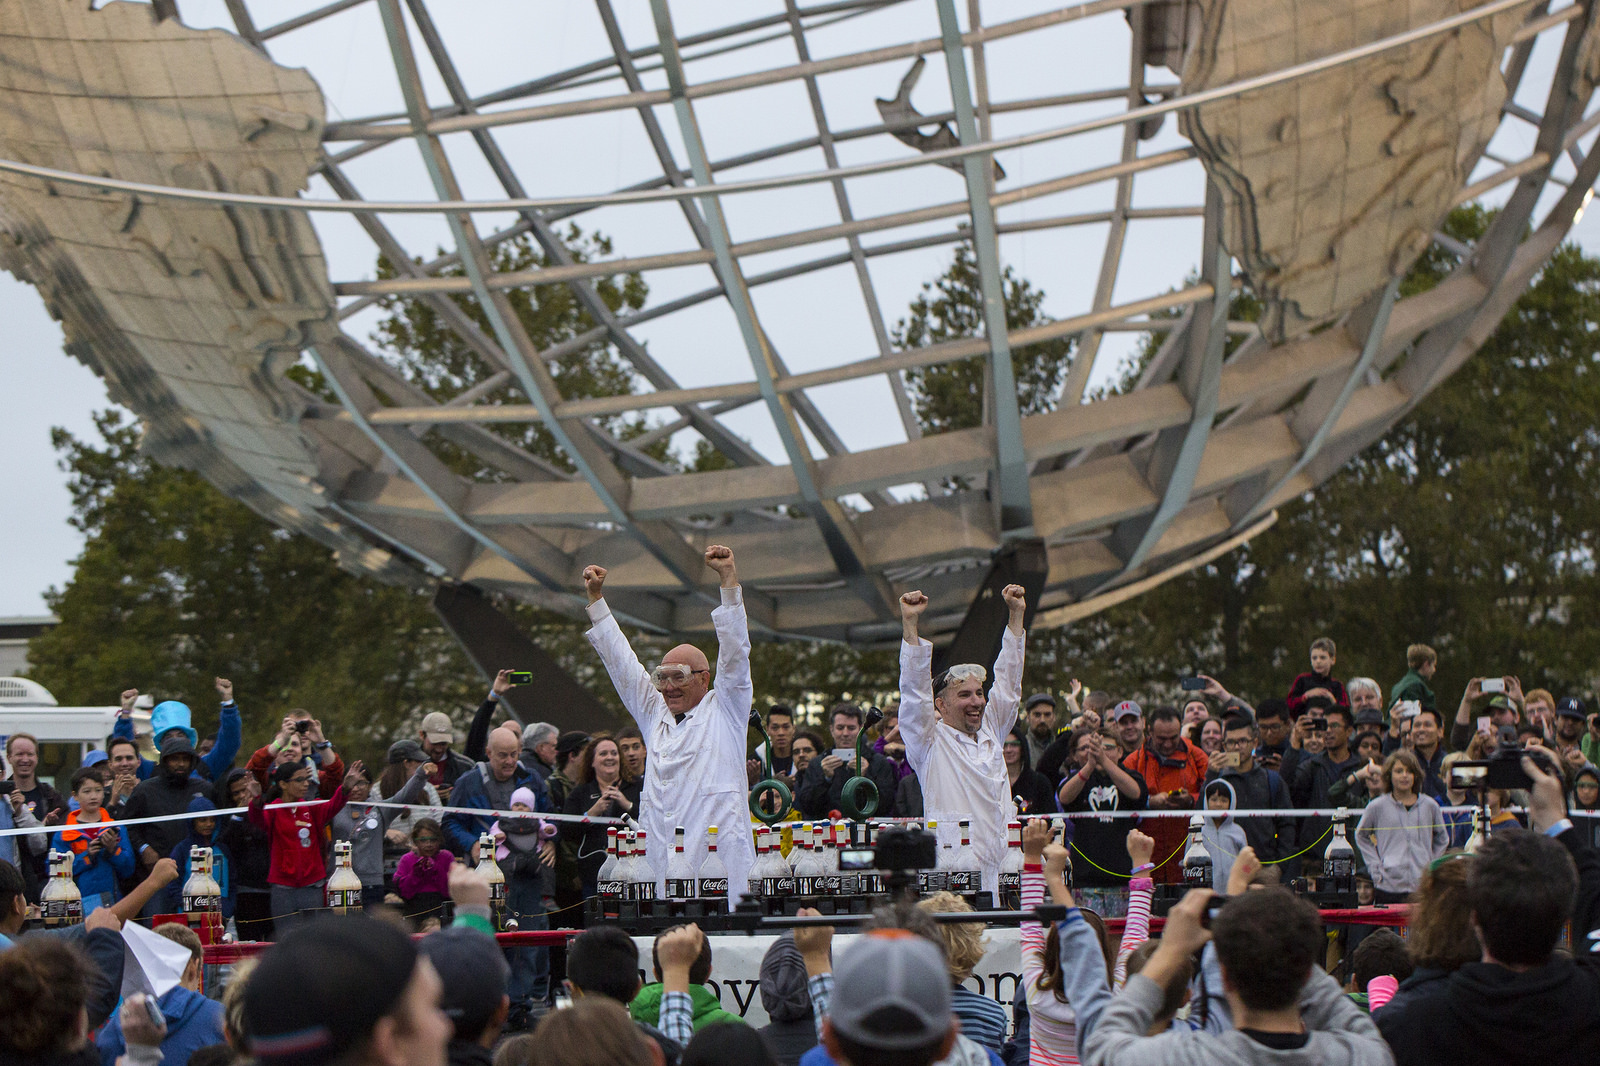 Coke and Mentos at the Unisphere. World Maker Faire 2016